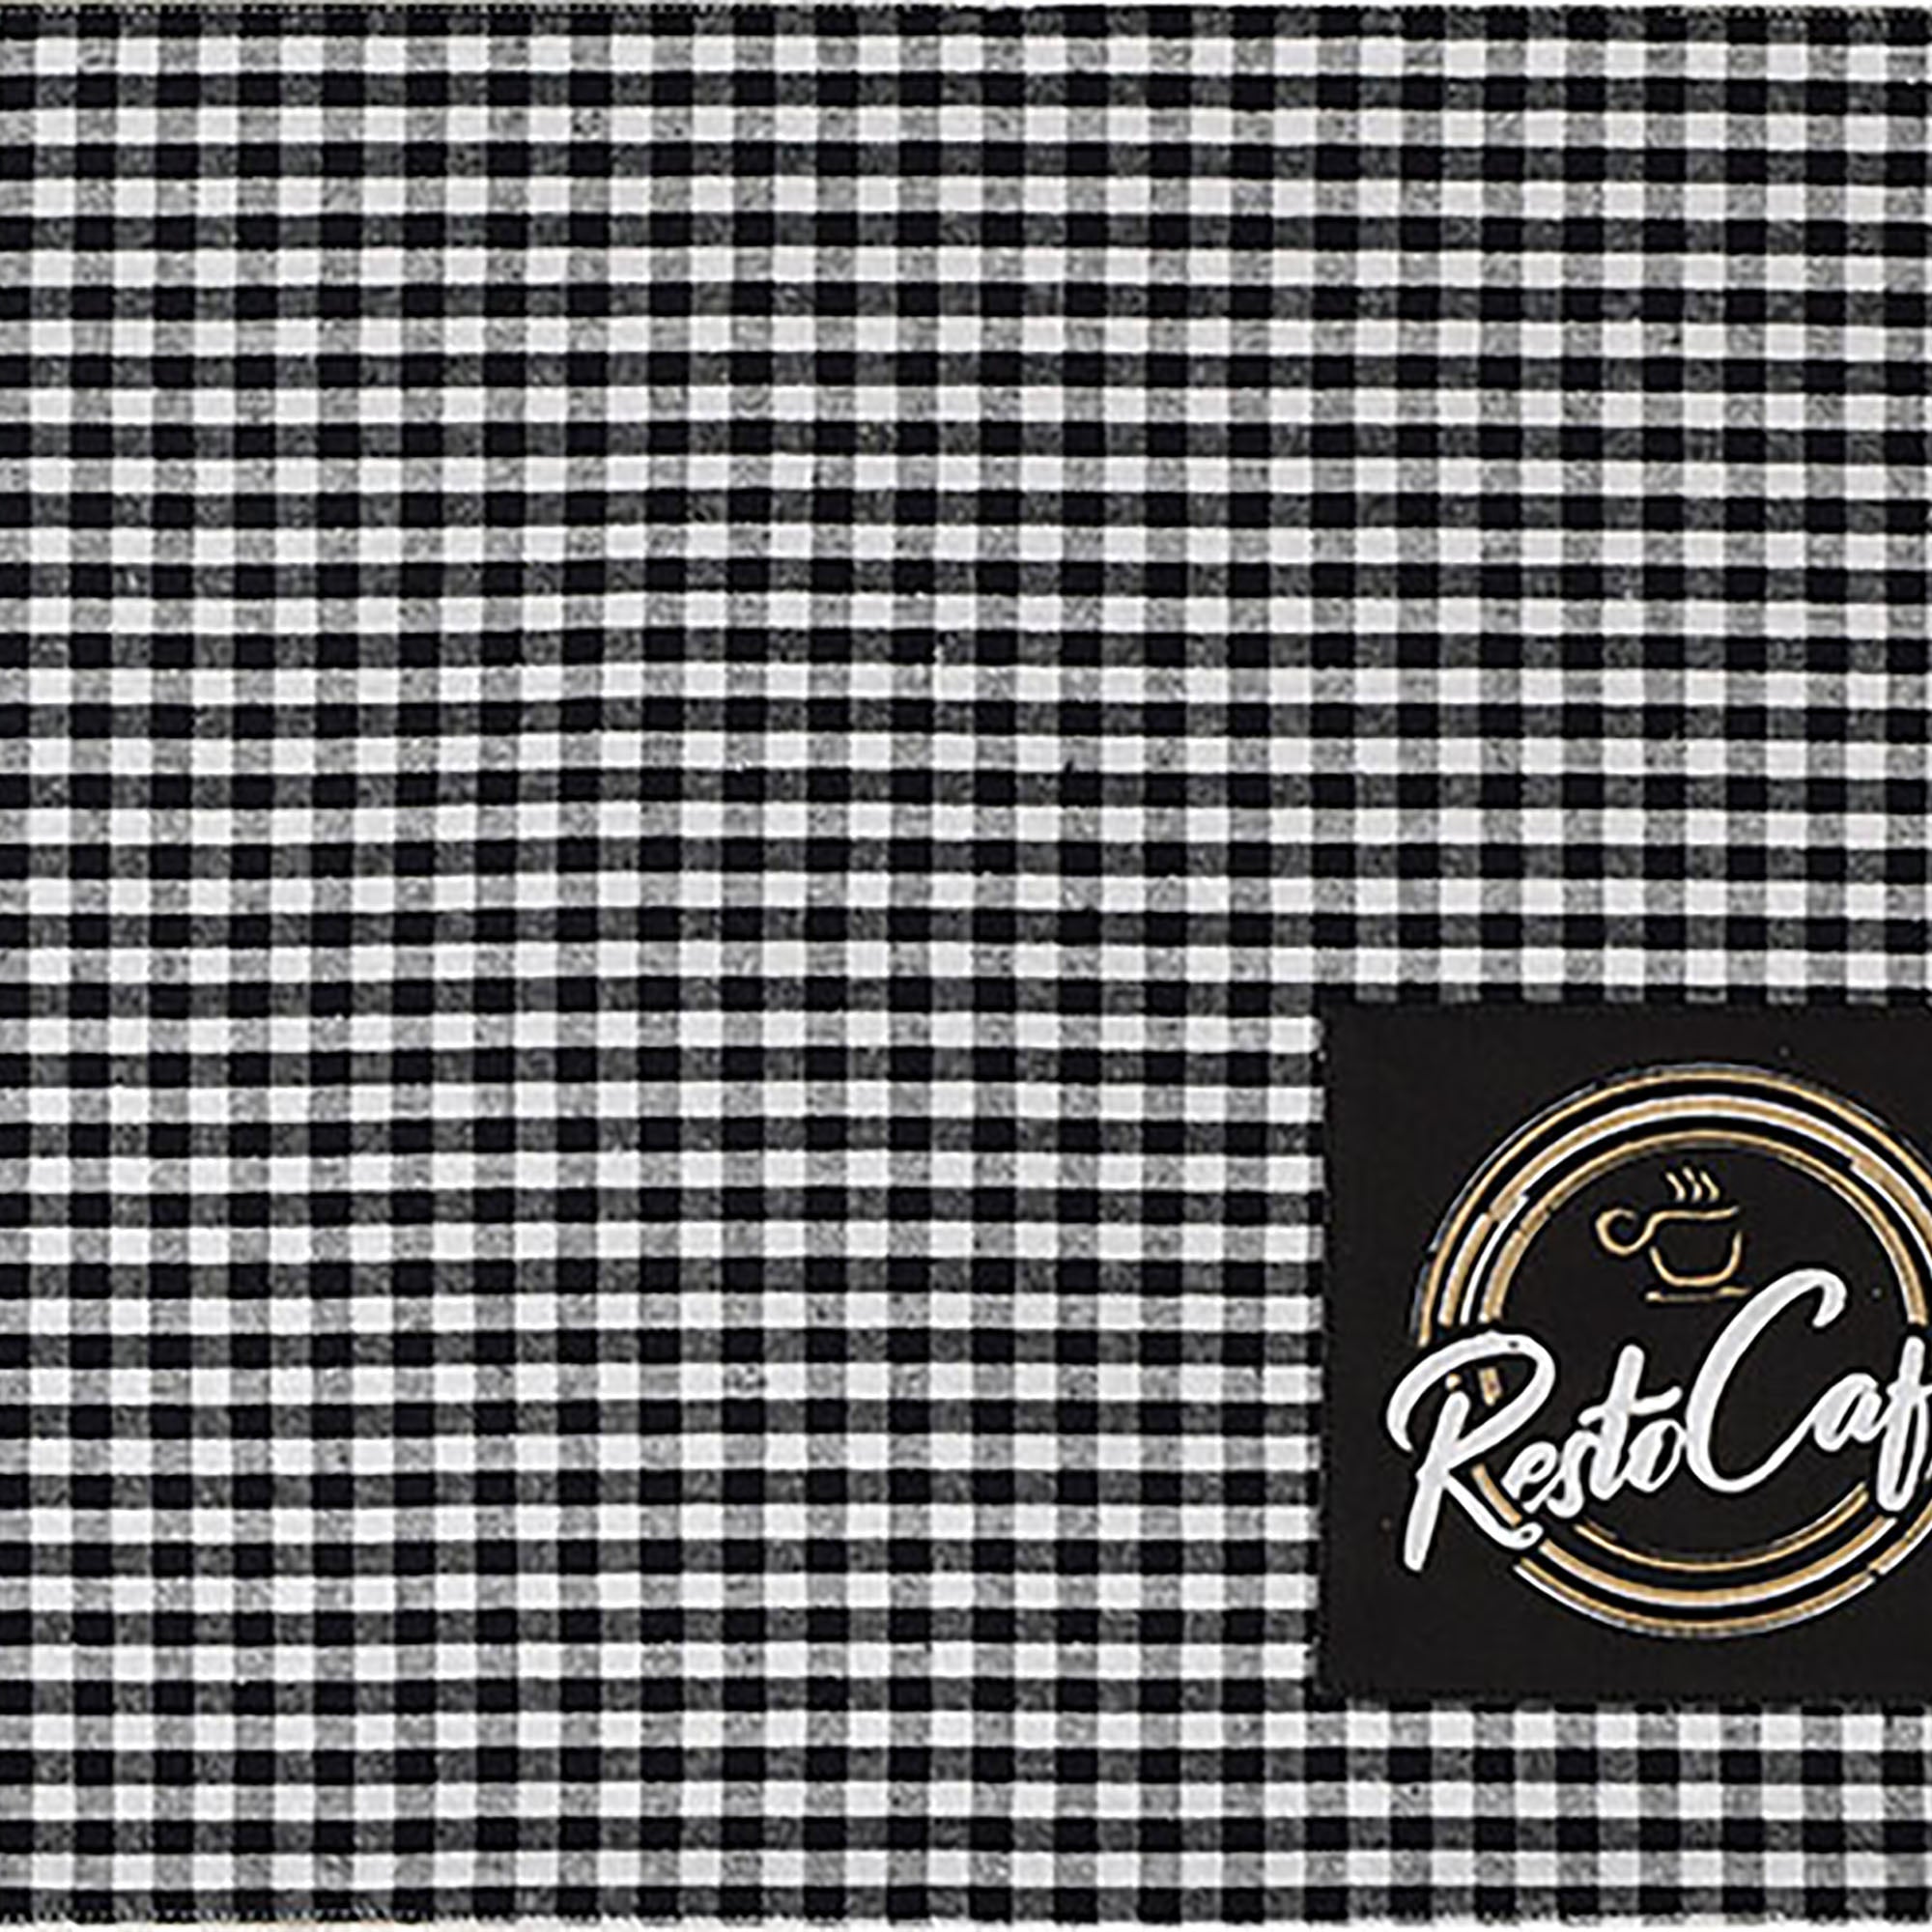 Resto Café Placemat 80% Cotton/20% Polyester 13x18in